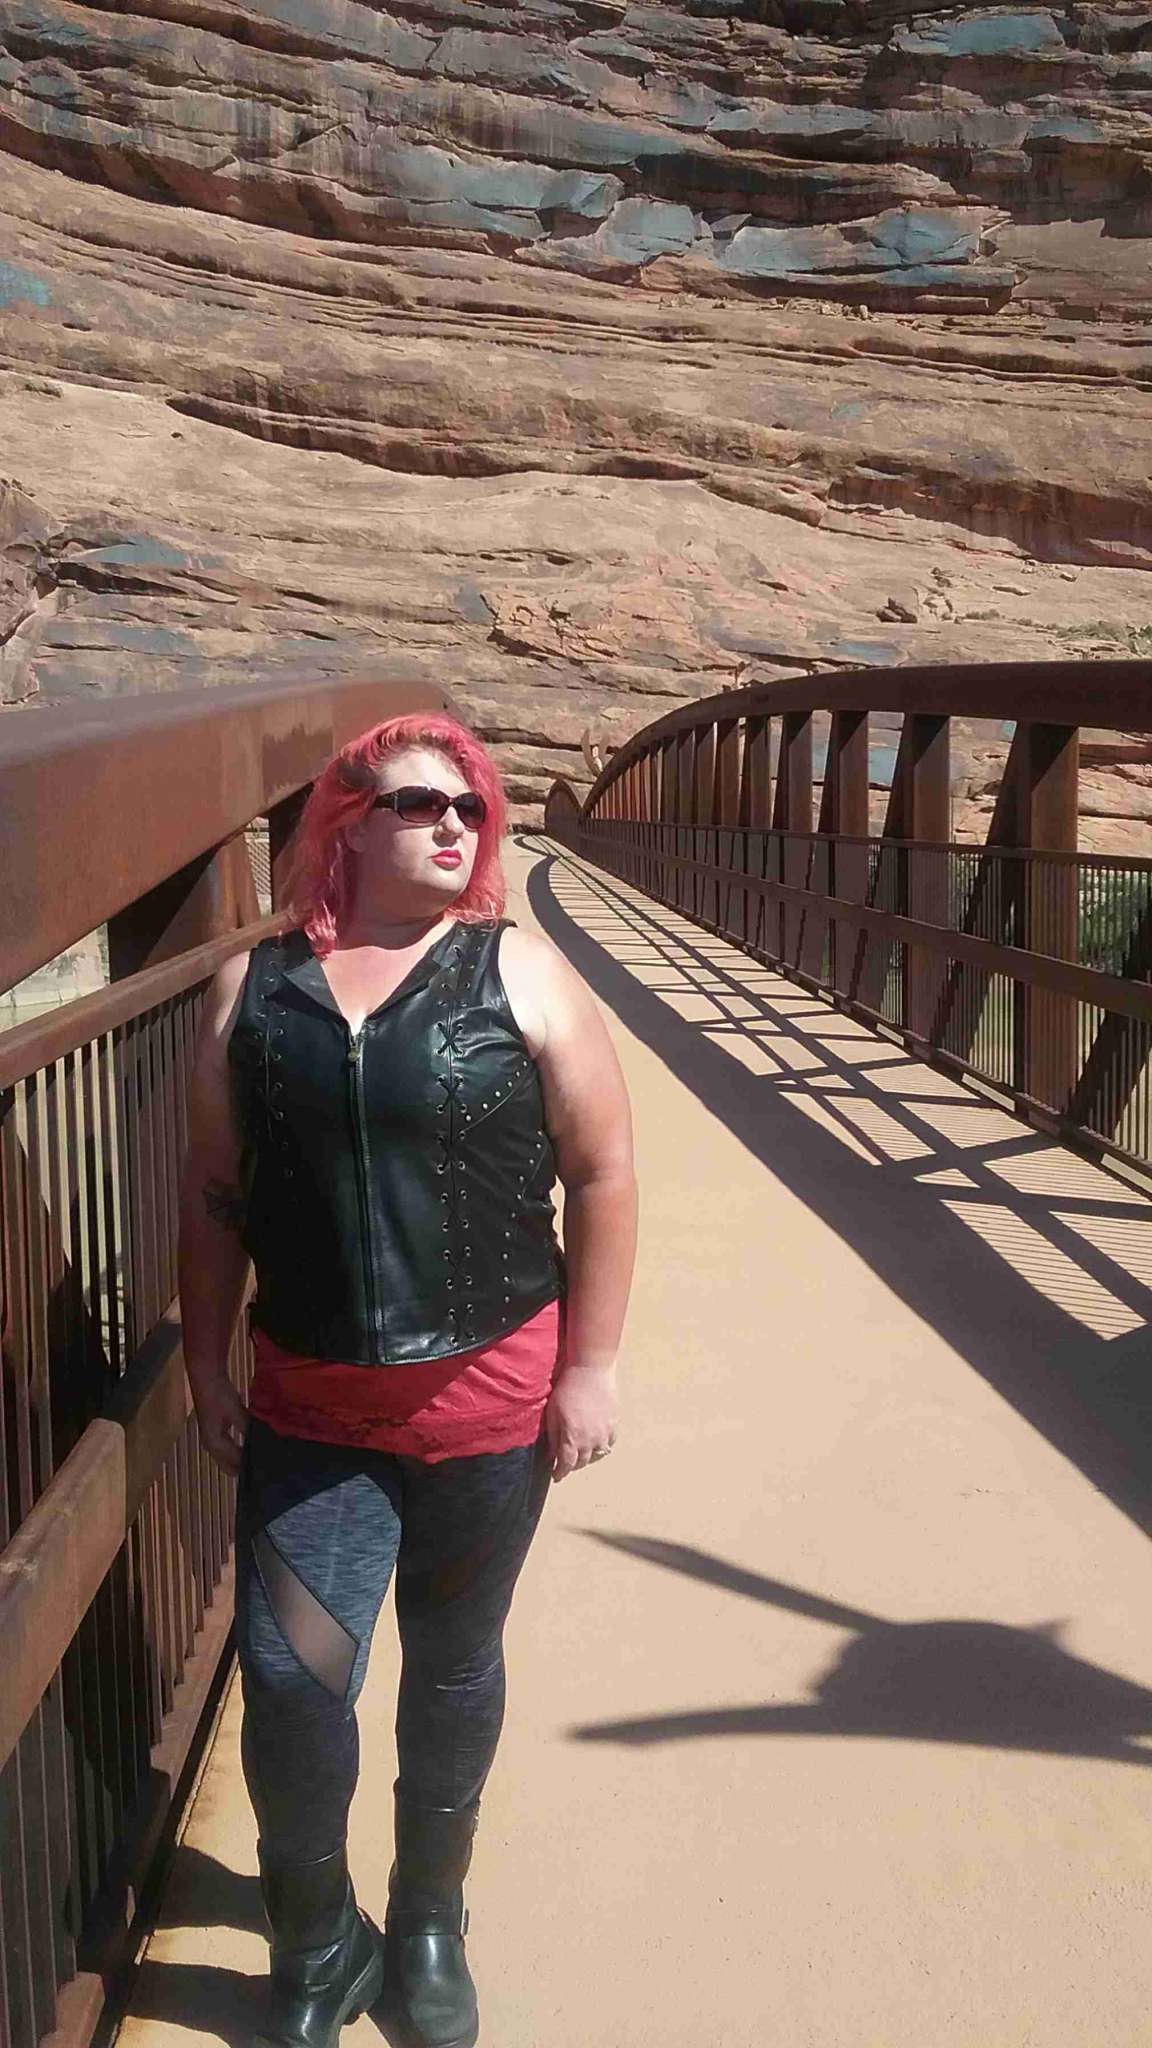 Indian Women's Review, A woman with striking red hair stands on a long river bridge in front of a beautiful red rock mountain wall, she is wearing a black leather motorcycle vest, motorcycle boots and sunglasses.